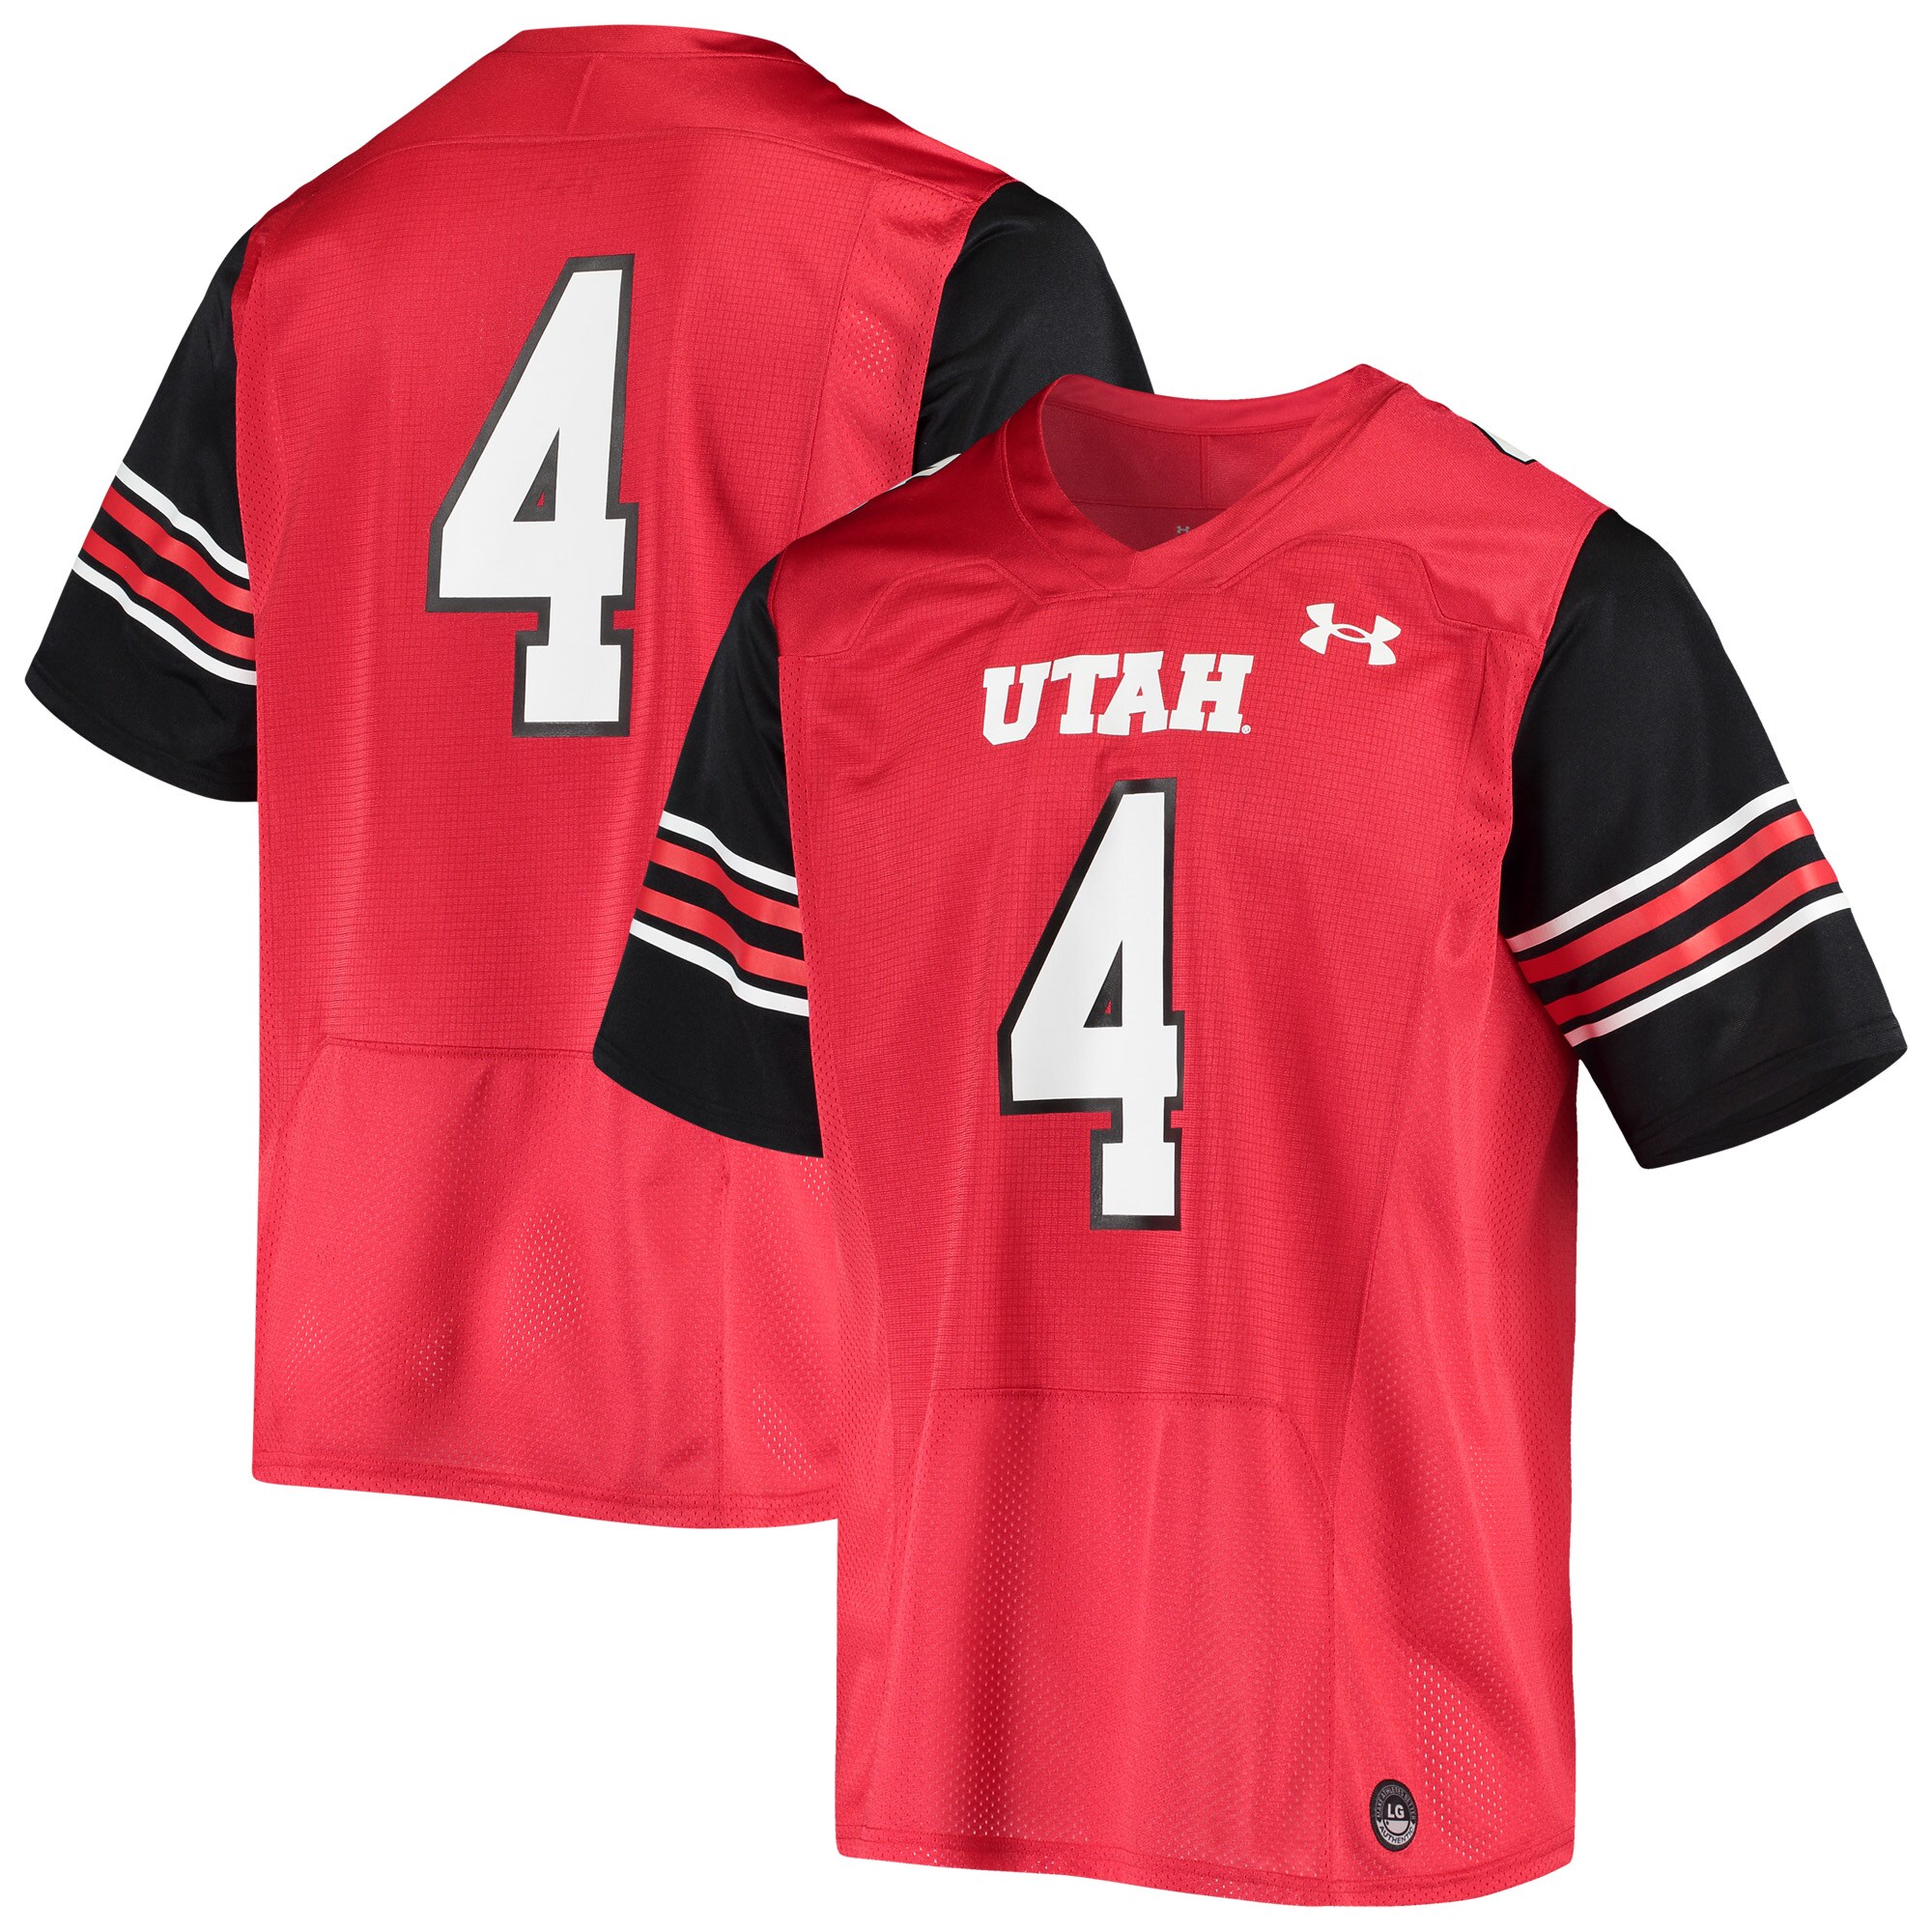 #4 Utah Utes Under Armour Logo Replica  Football Shirts Jersey - Red For Youth Women Men